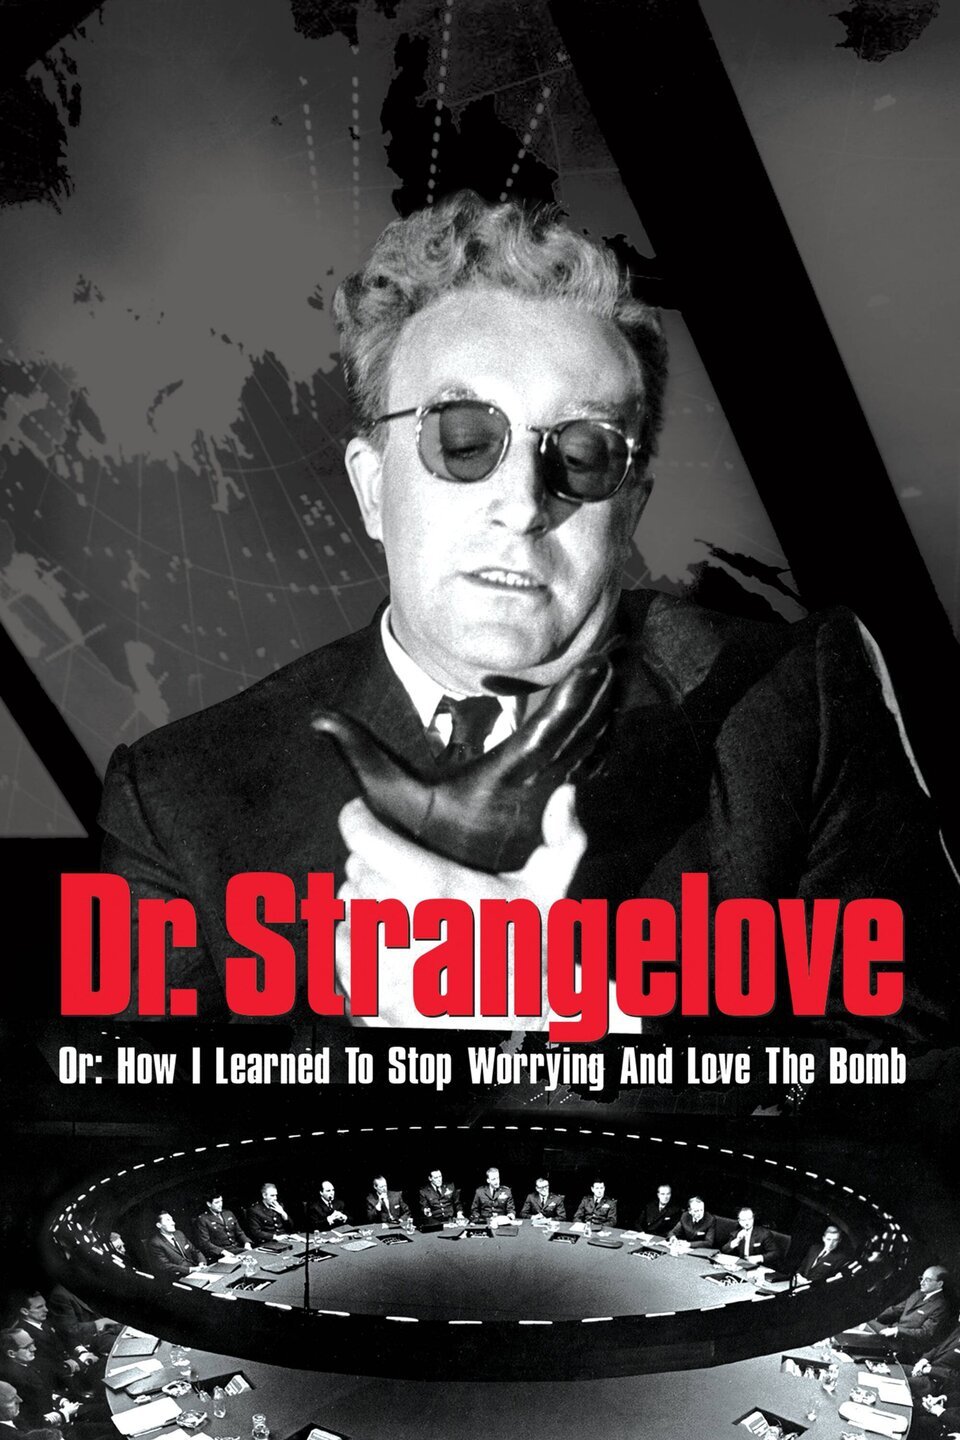 "Dr. Strangelove Or: How I Learned to Stop Worrying and Love the Bomb photo 15"